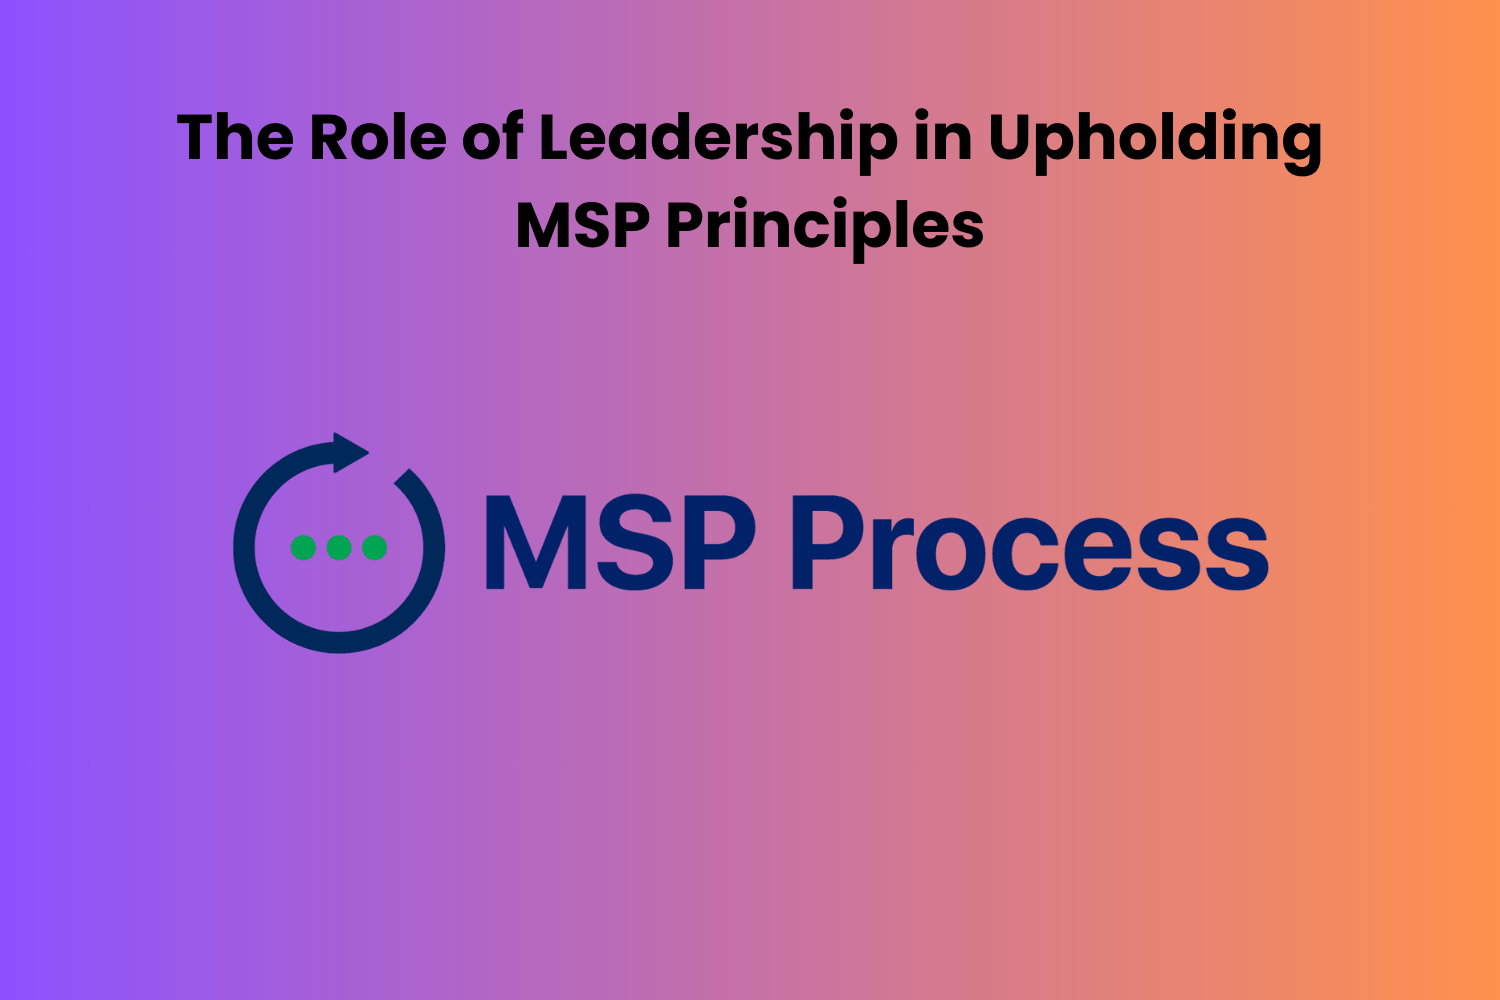 The Role of Leadership in Upholding MSP Principles